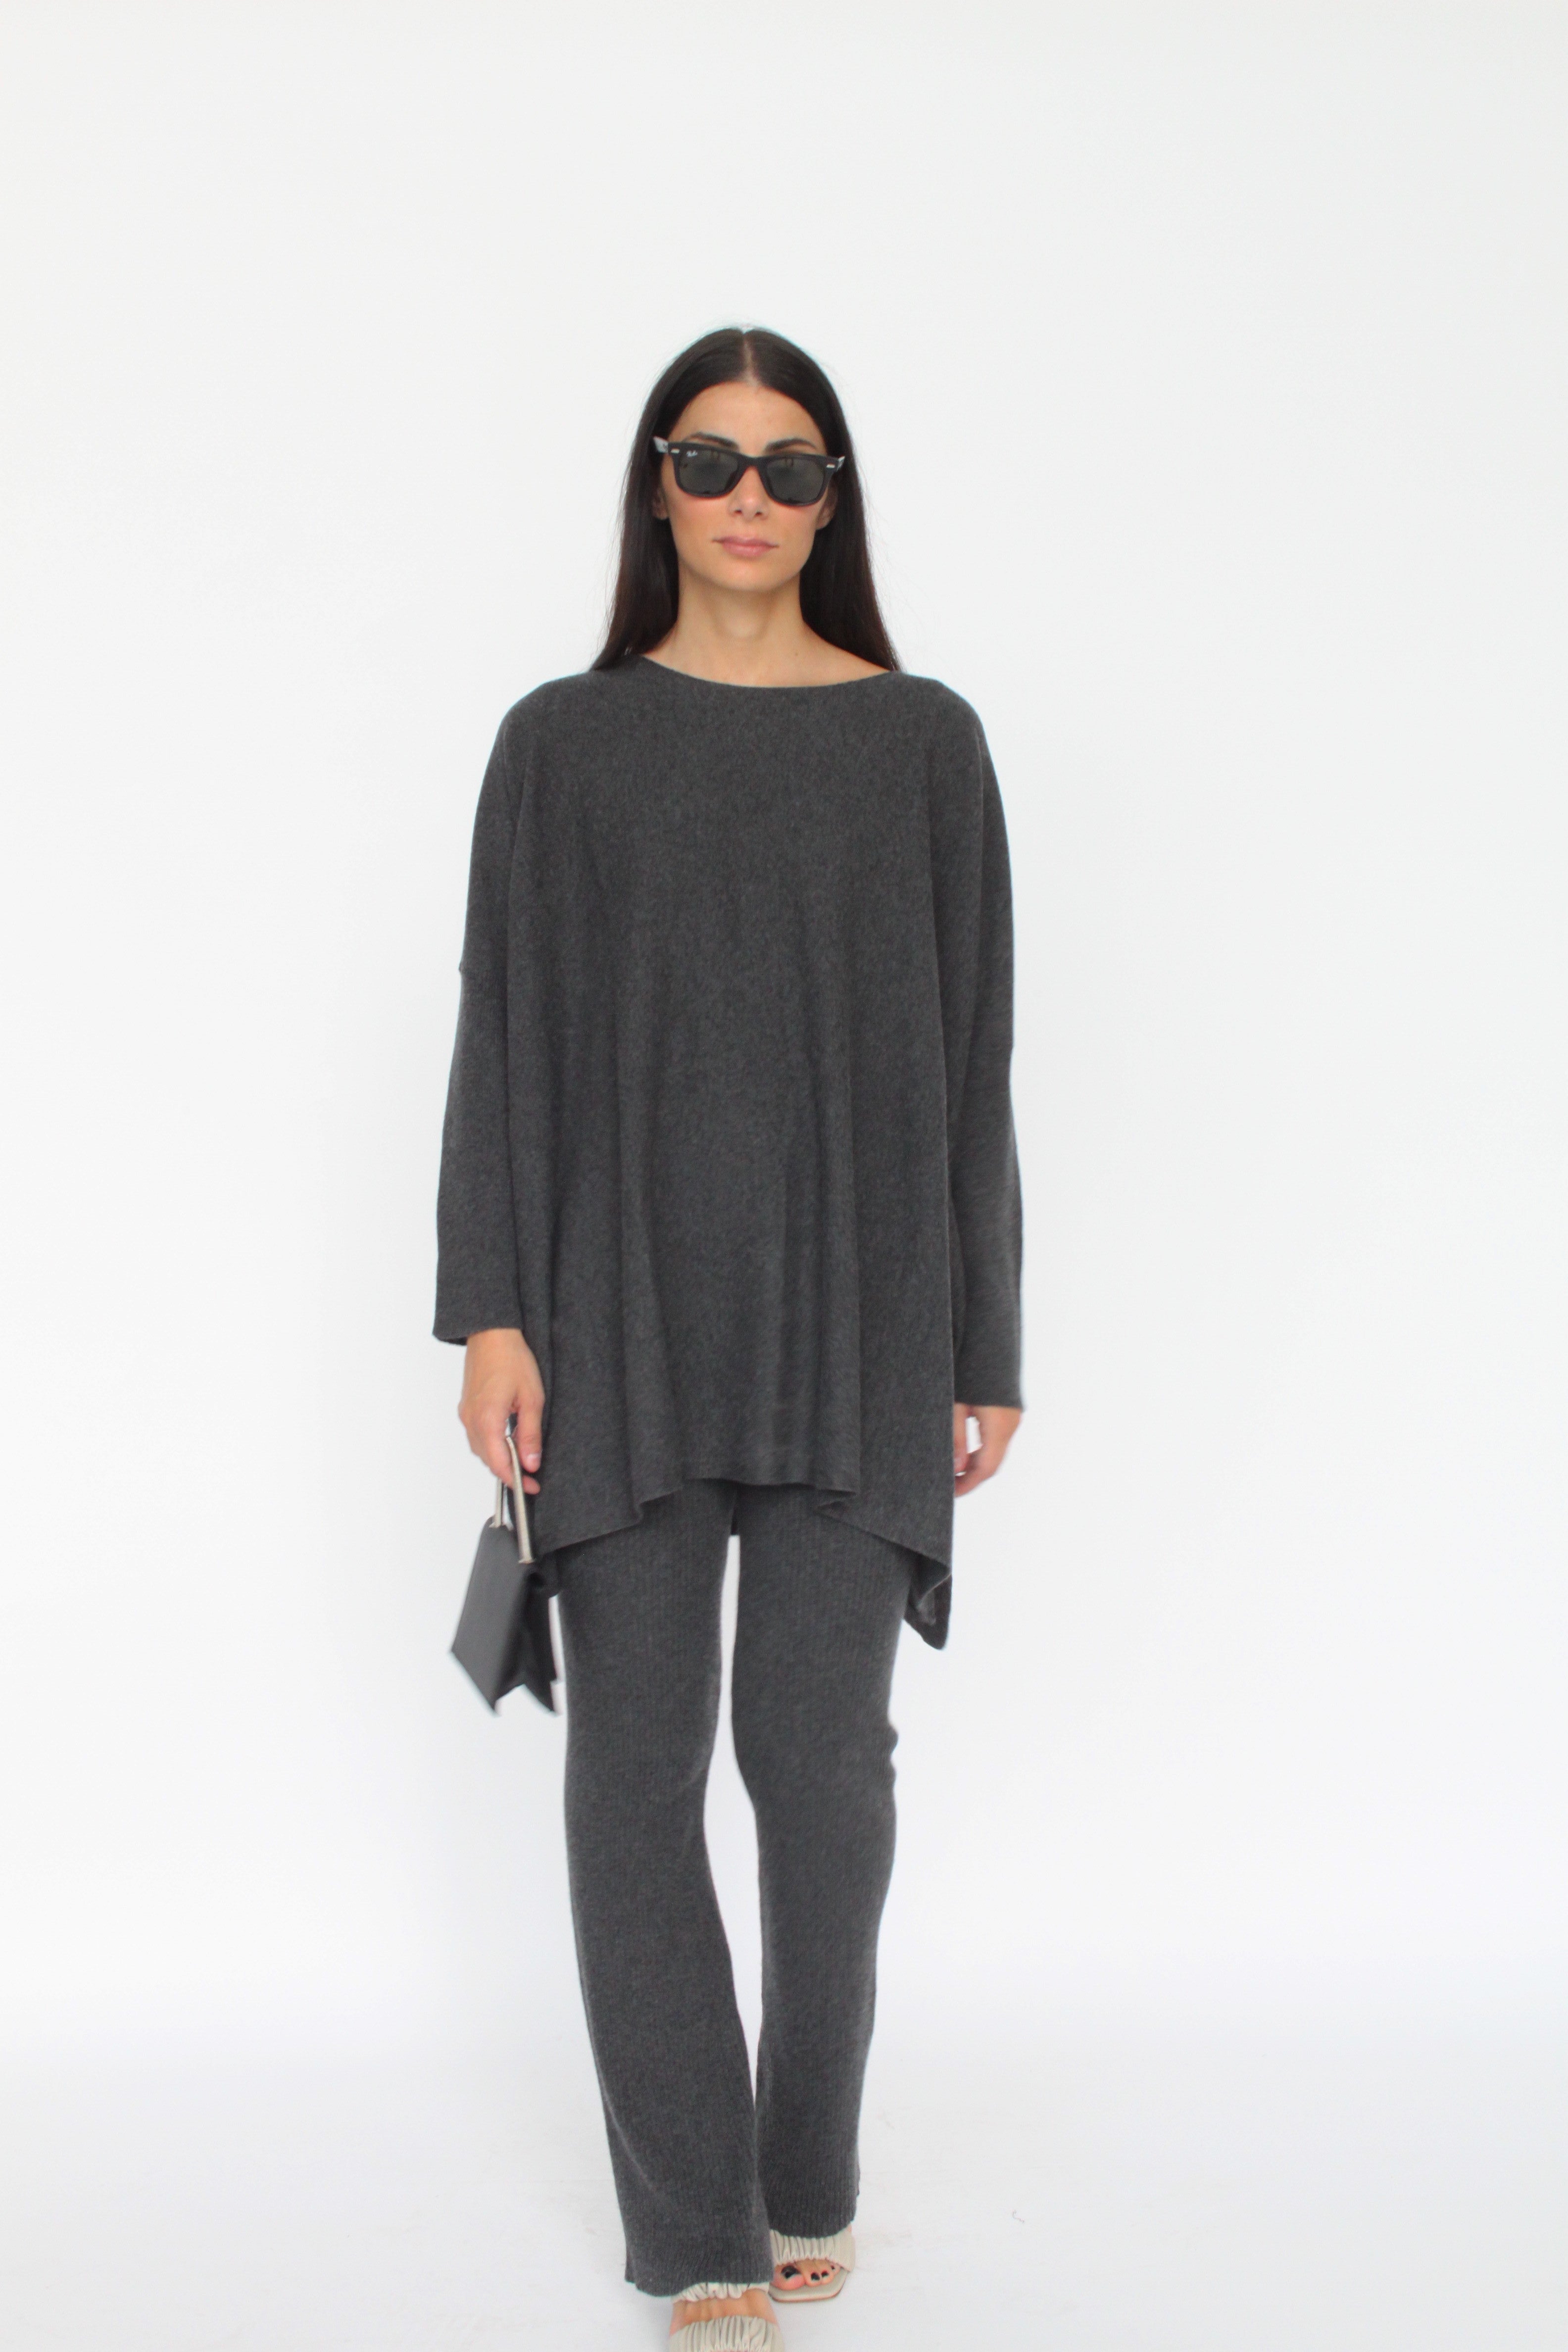 Cashmere blend knit trousers - Angela